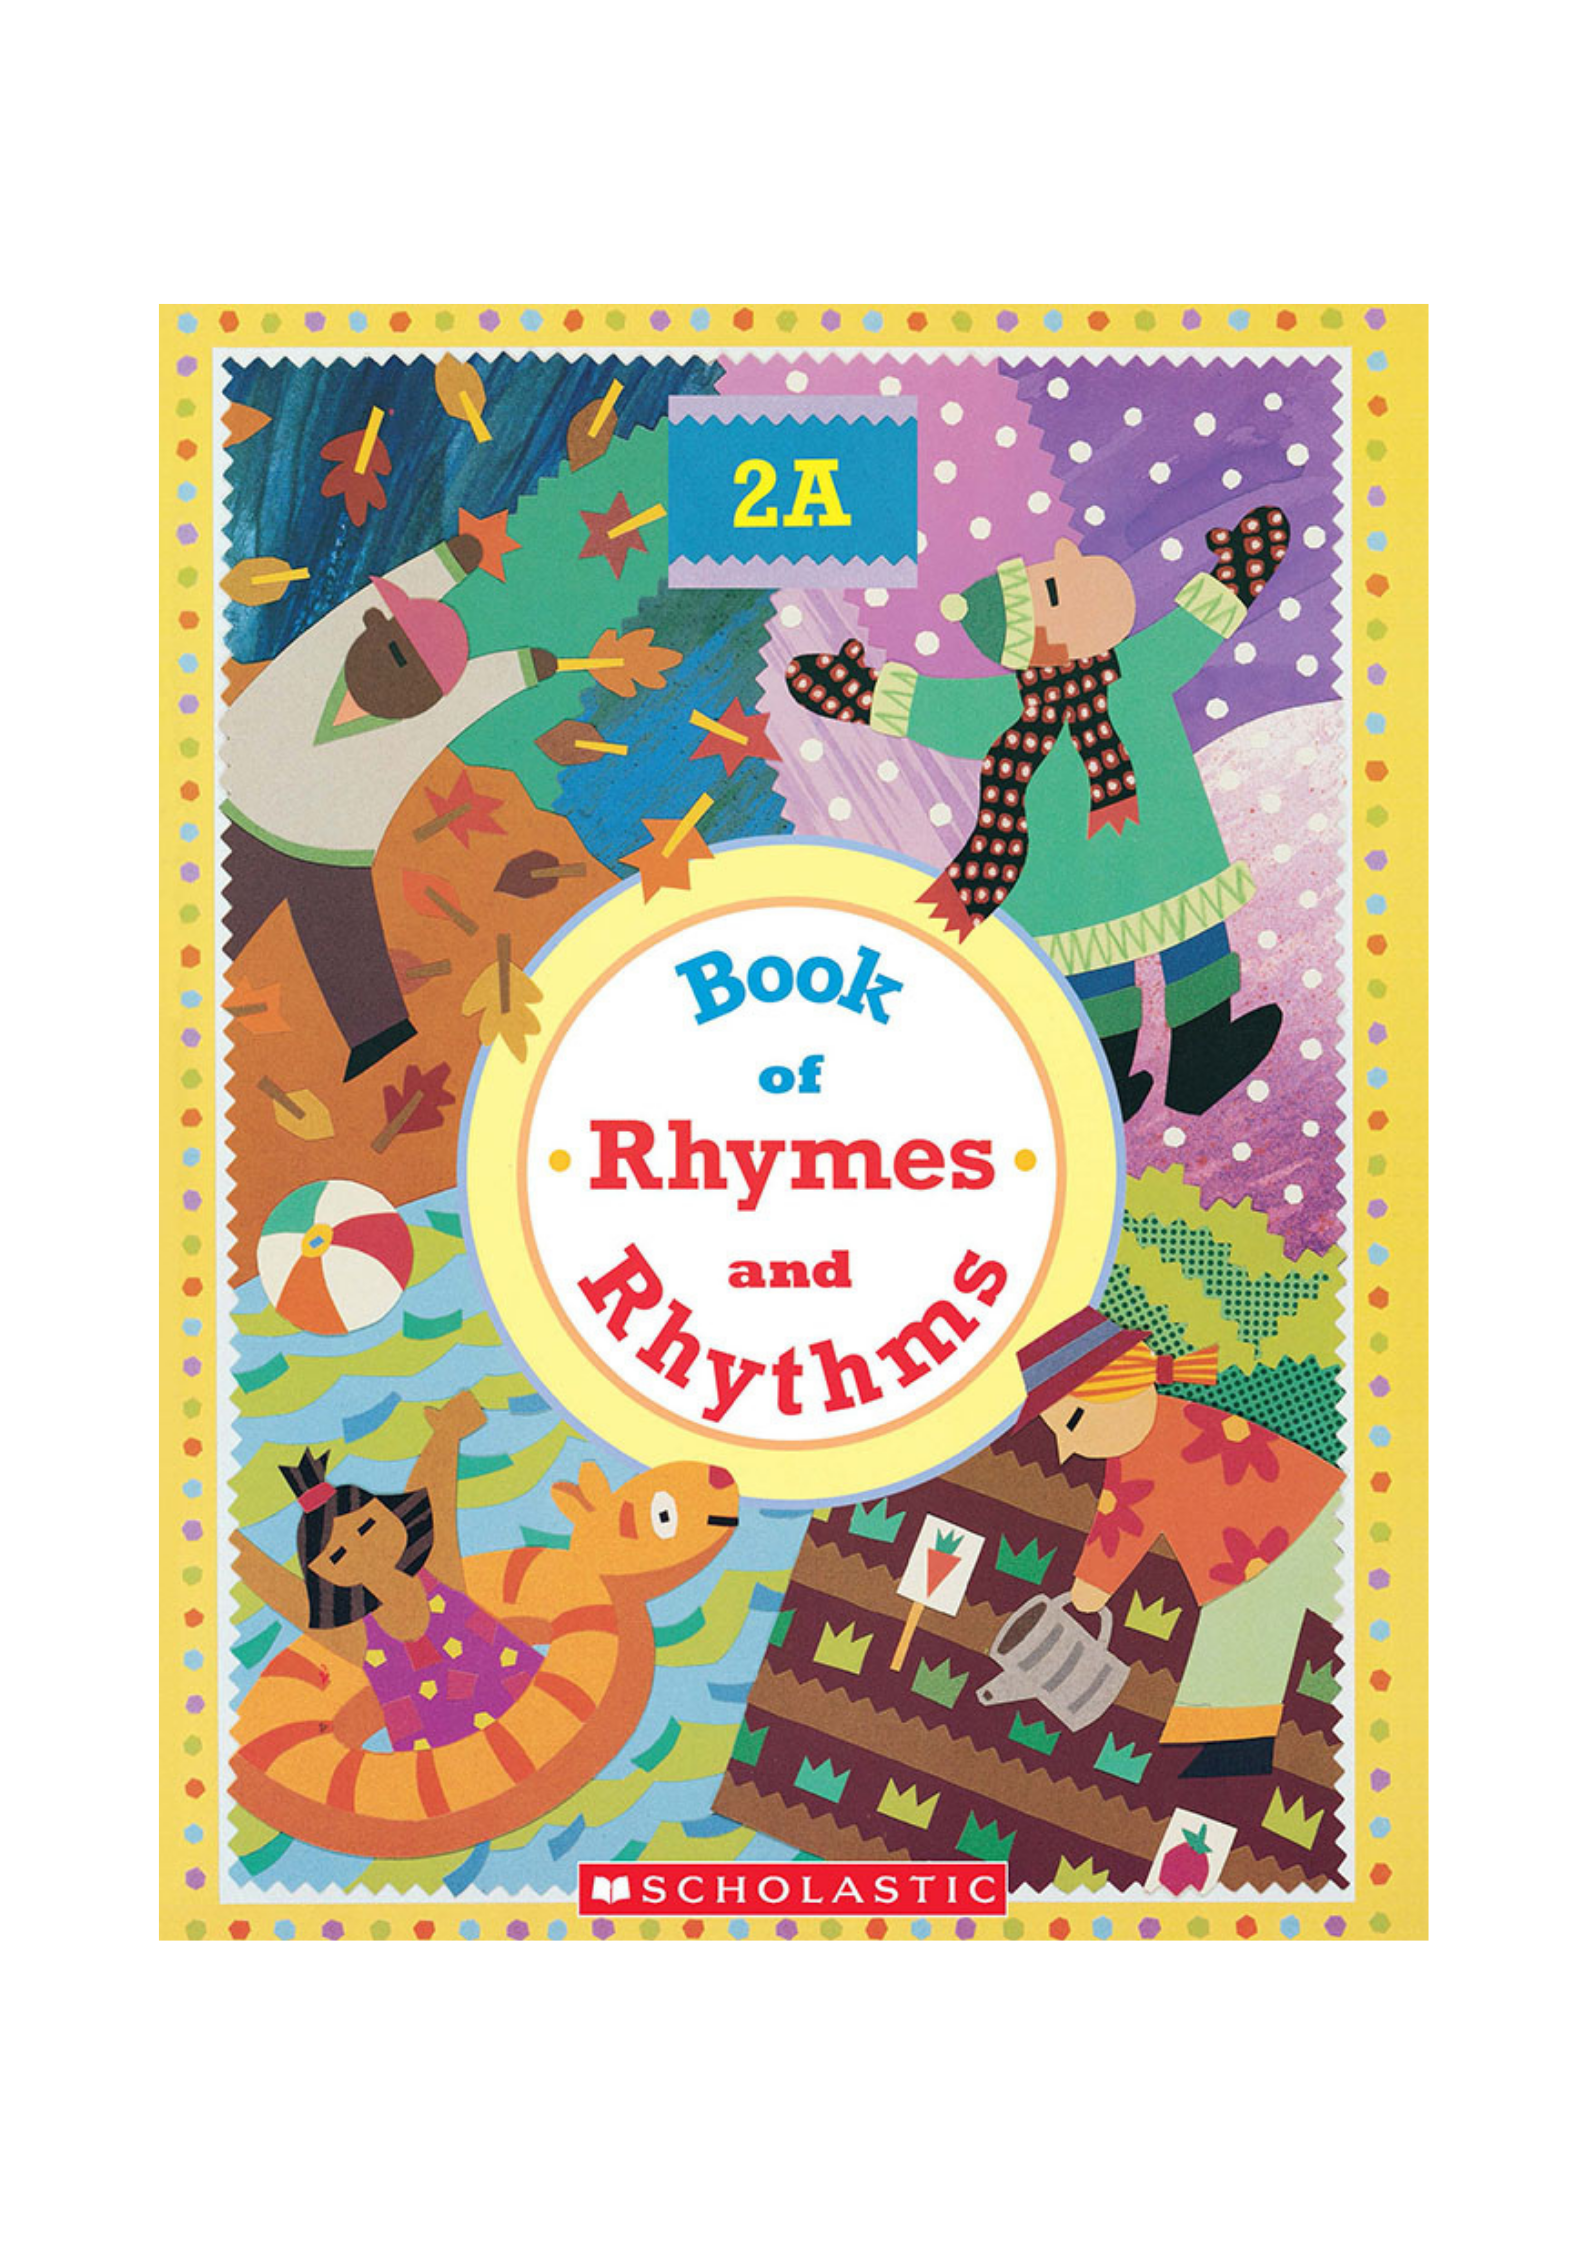 Rhymes and Rhythms Collection: Book Of Rhymes And Rhythms (2A)